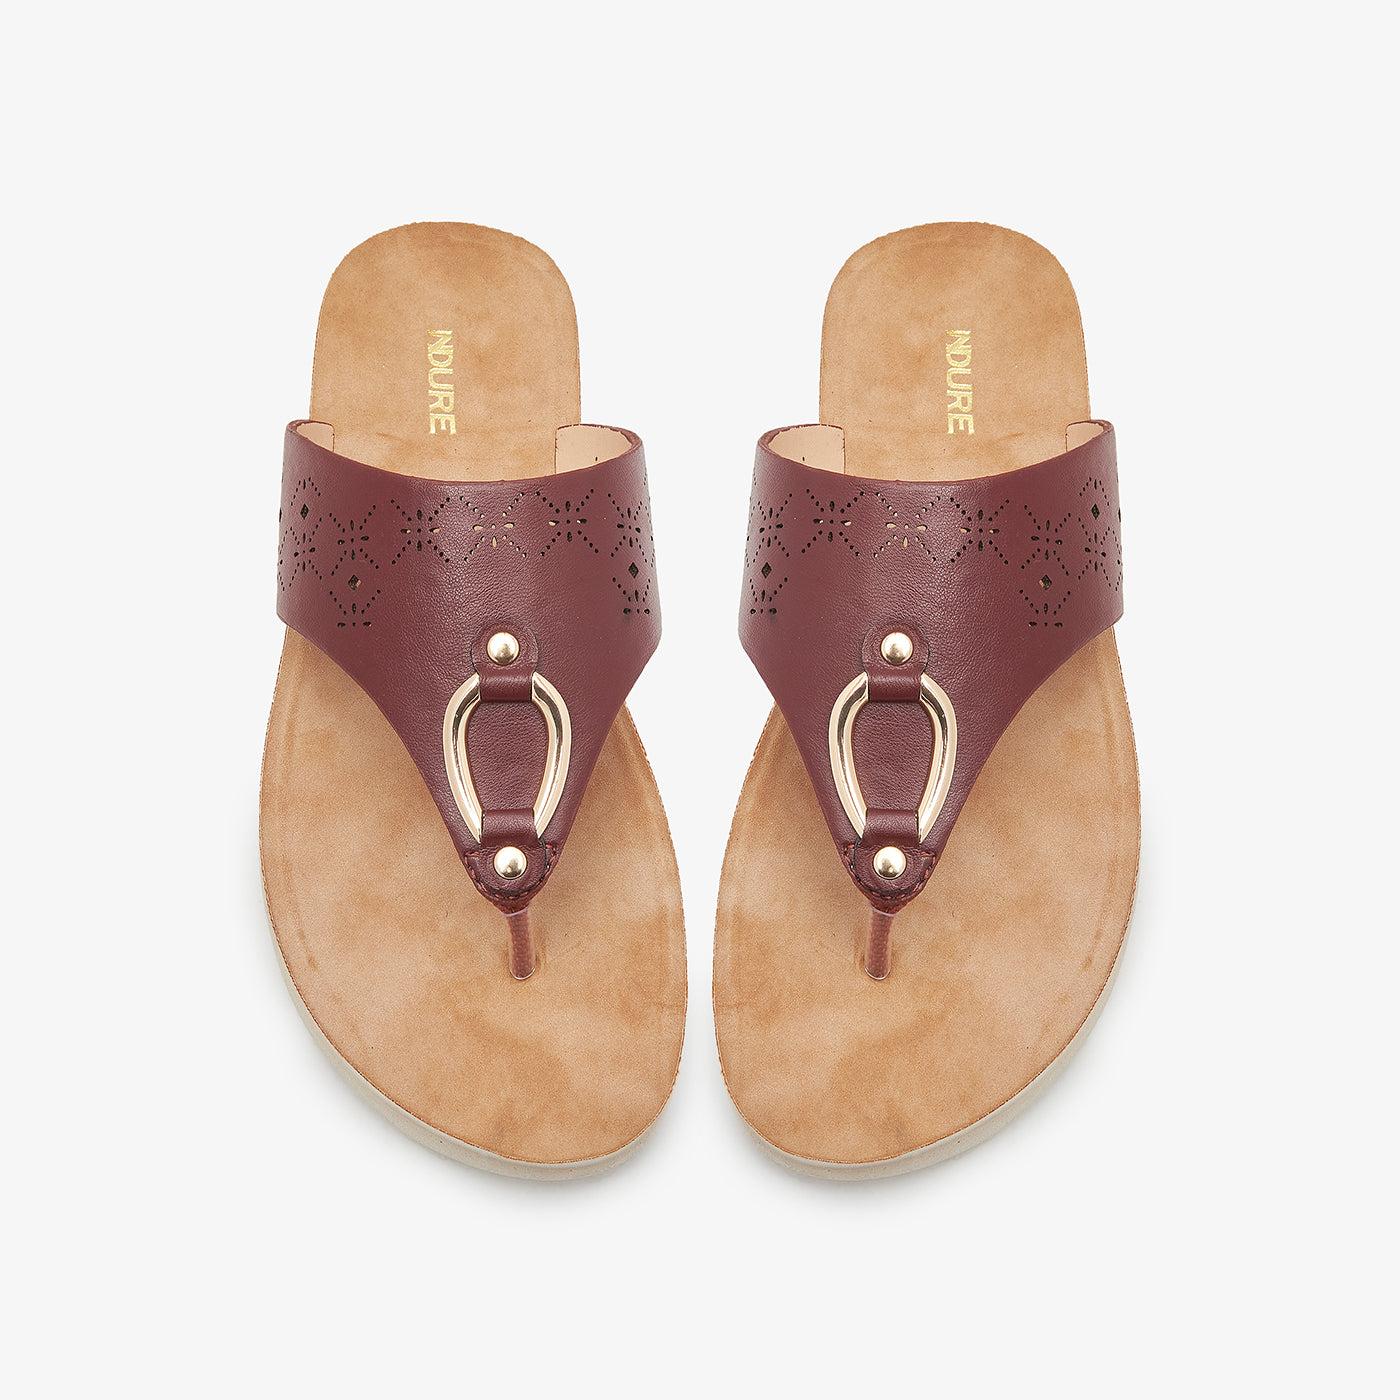 WOMEN'S CUSHIONED SANDALS, UNDEFINED, NDURE, MODJEN FOR THE MODERN  GENERATION